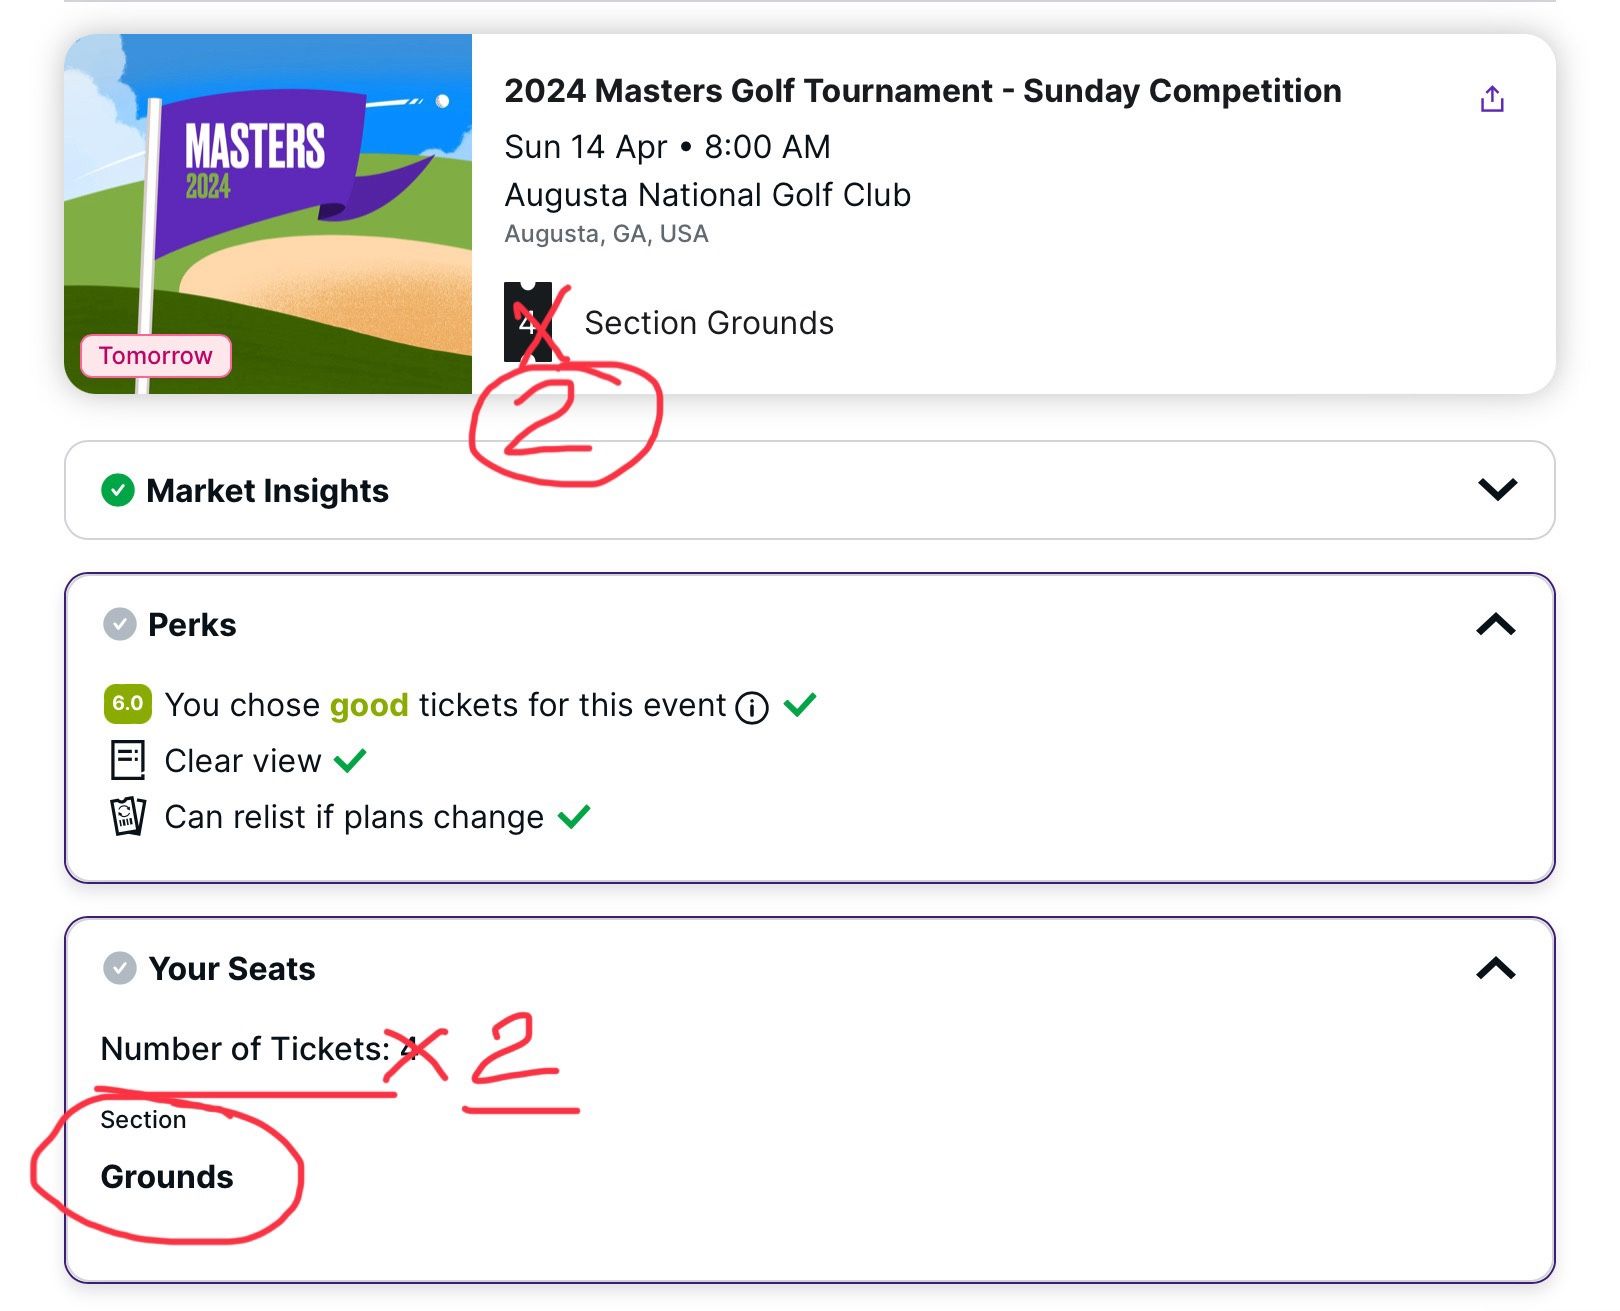 MASTERS GOLF TOURNAMENT  (Purchase Confirmation Attached) 2 TICKETS REMAINING 